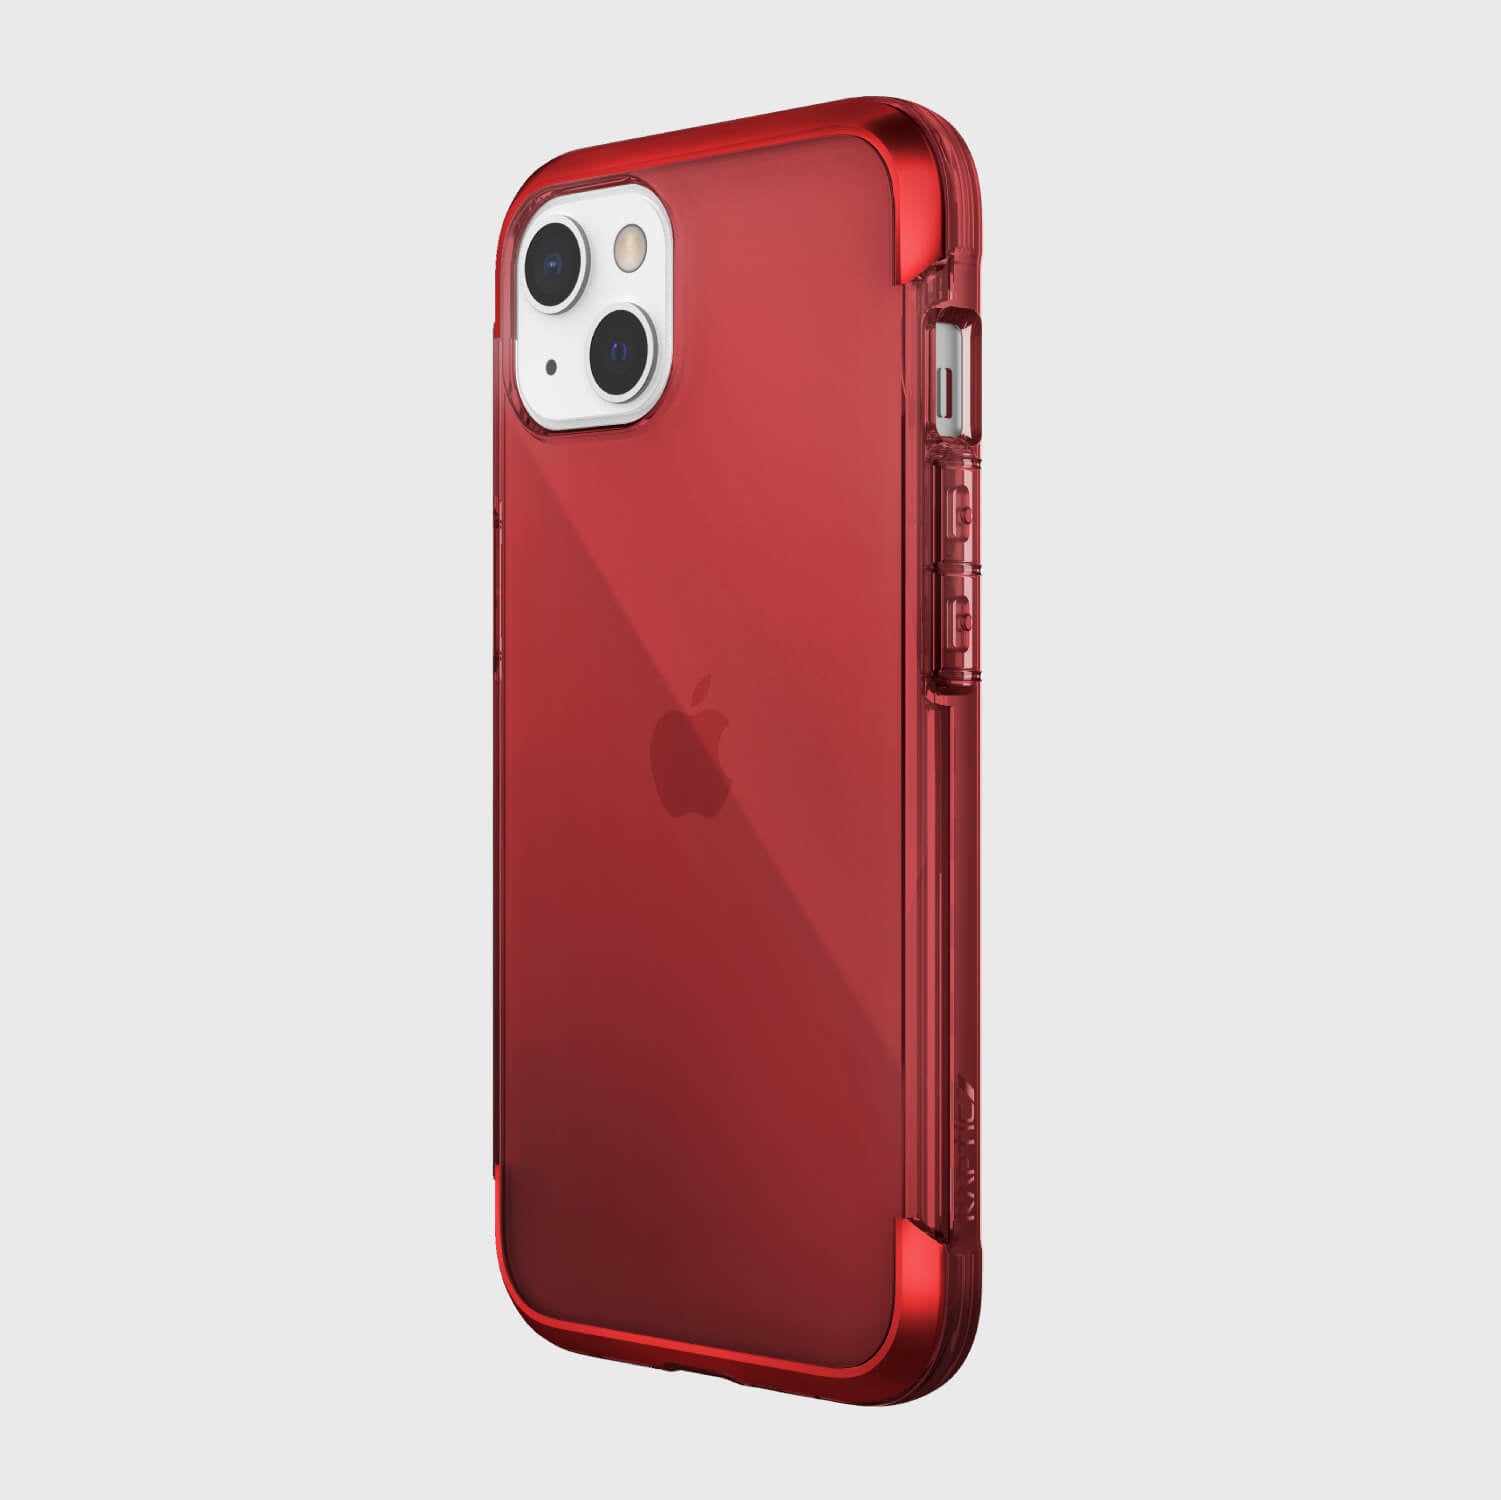 The red iPhone 13 Case - AIR by Raptic is drop proof and wireless charging compatible, shown on a white background.